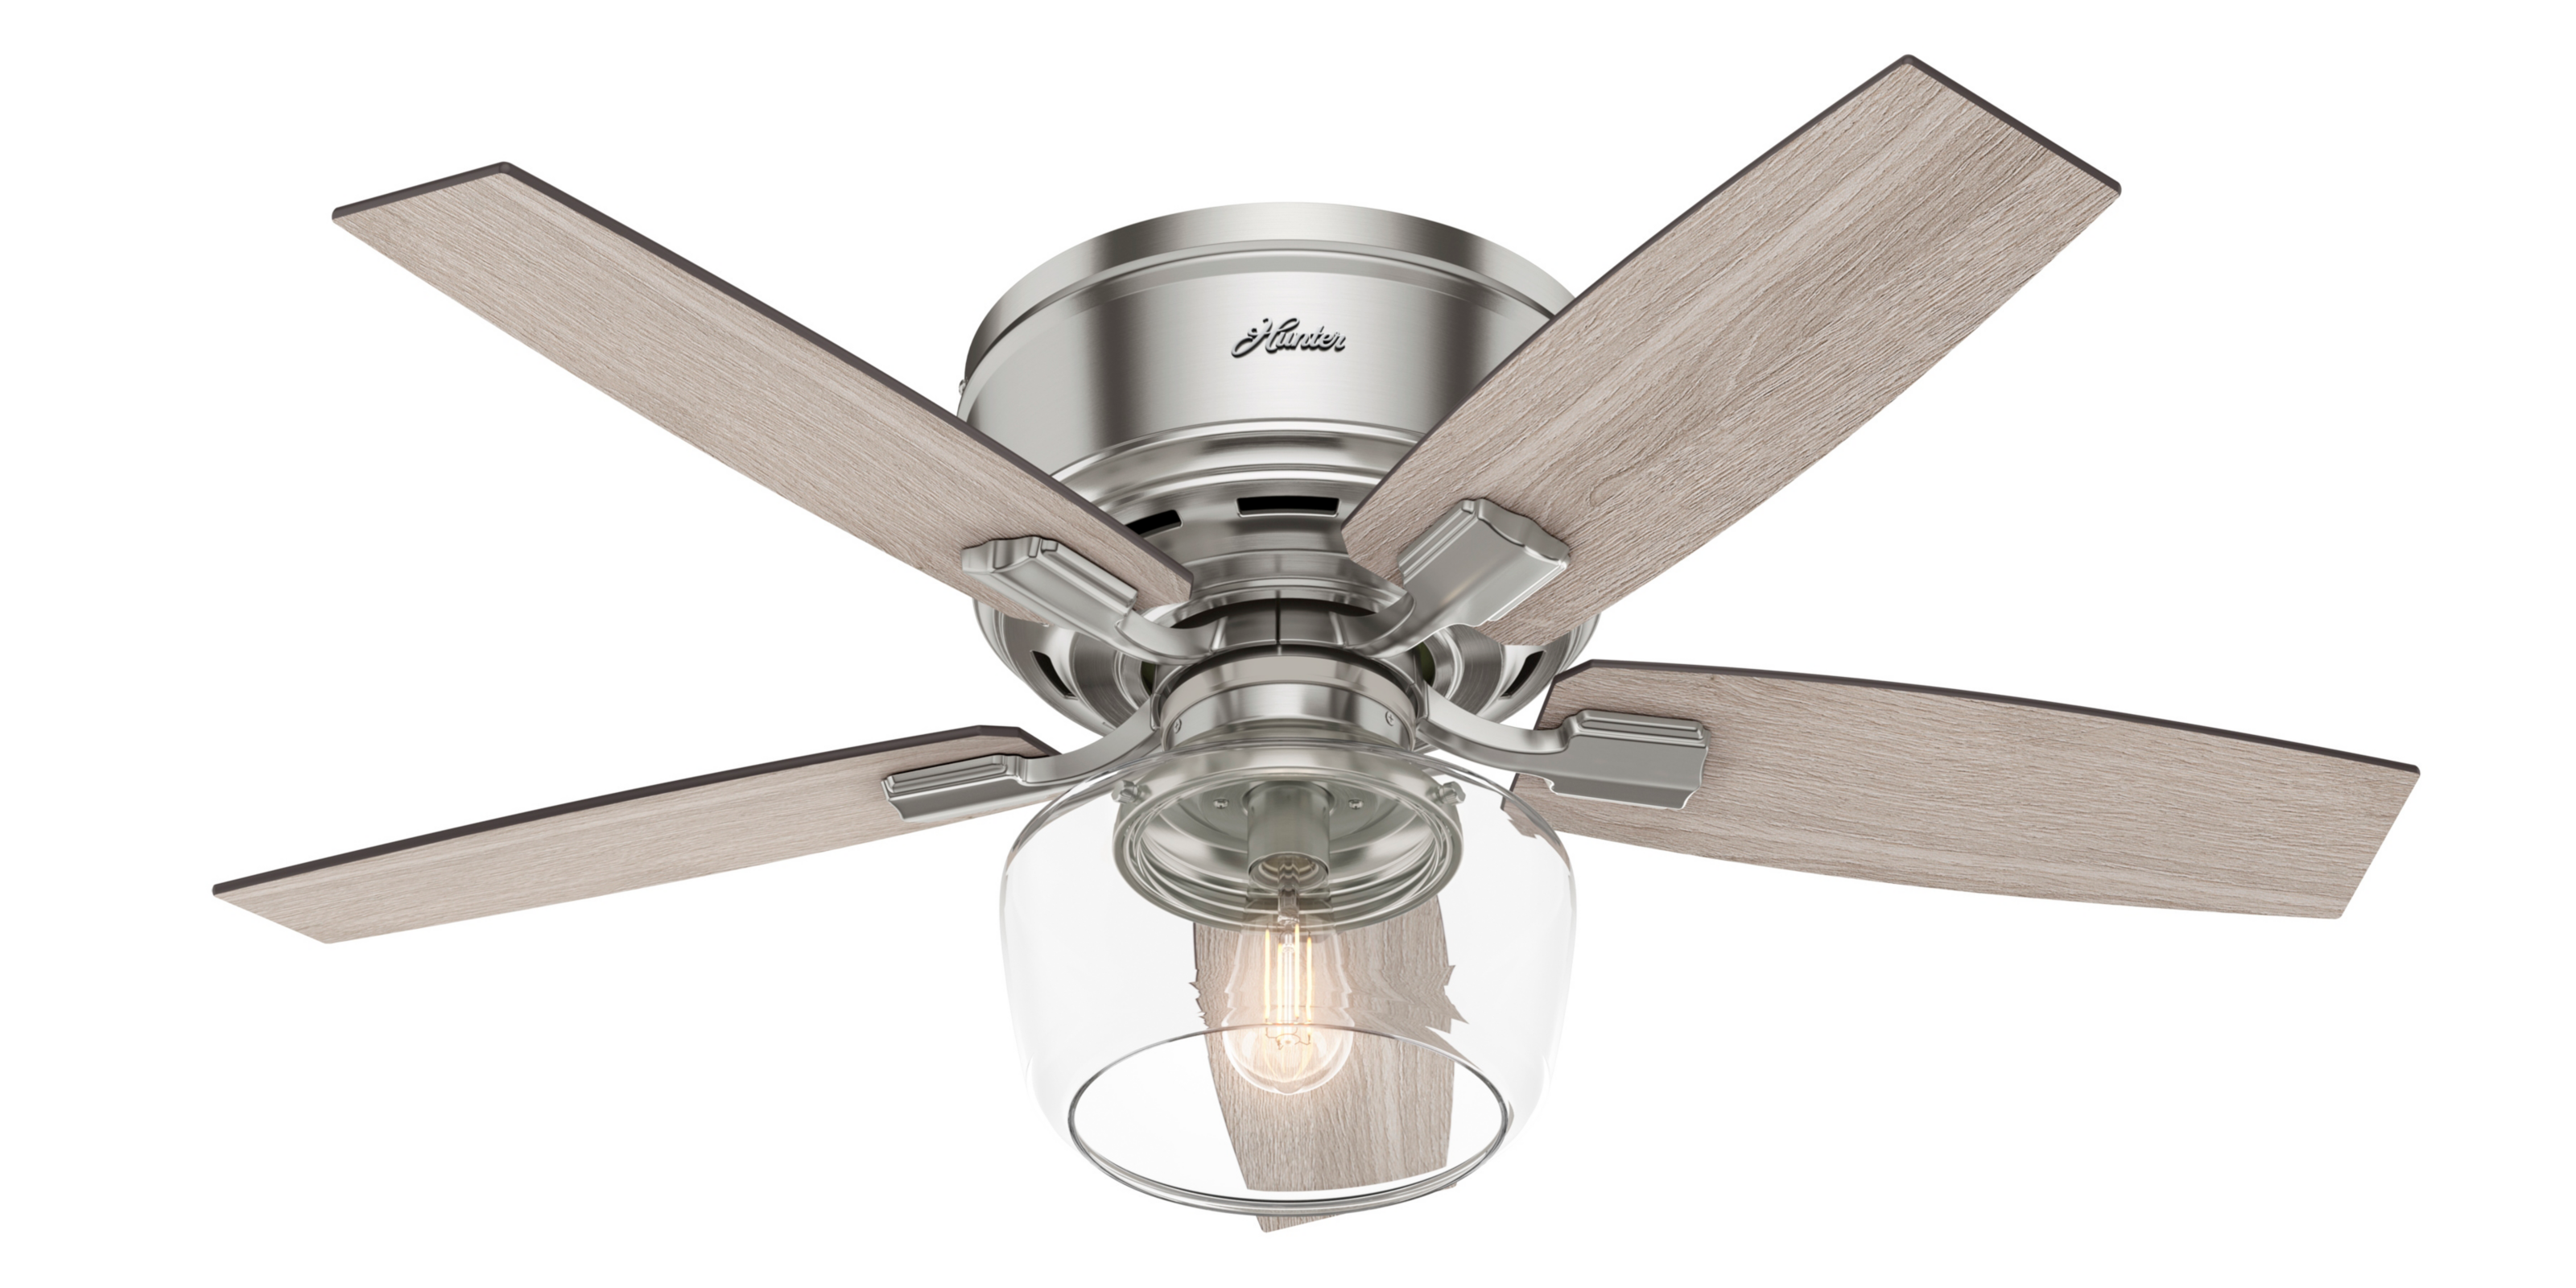 Hunter 44 inch Bennett Low Profile Ceiling Fan with LED Light Kit and Handheld Remote